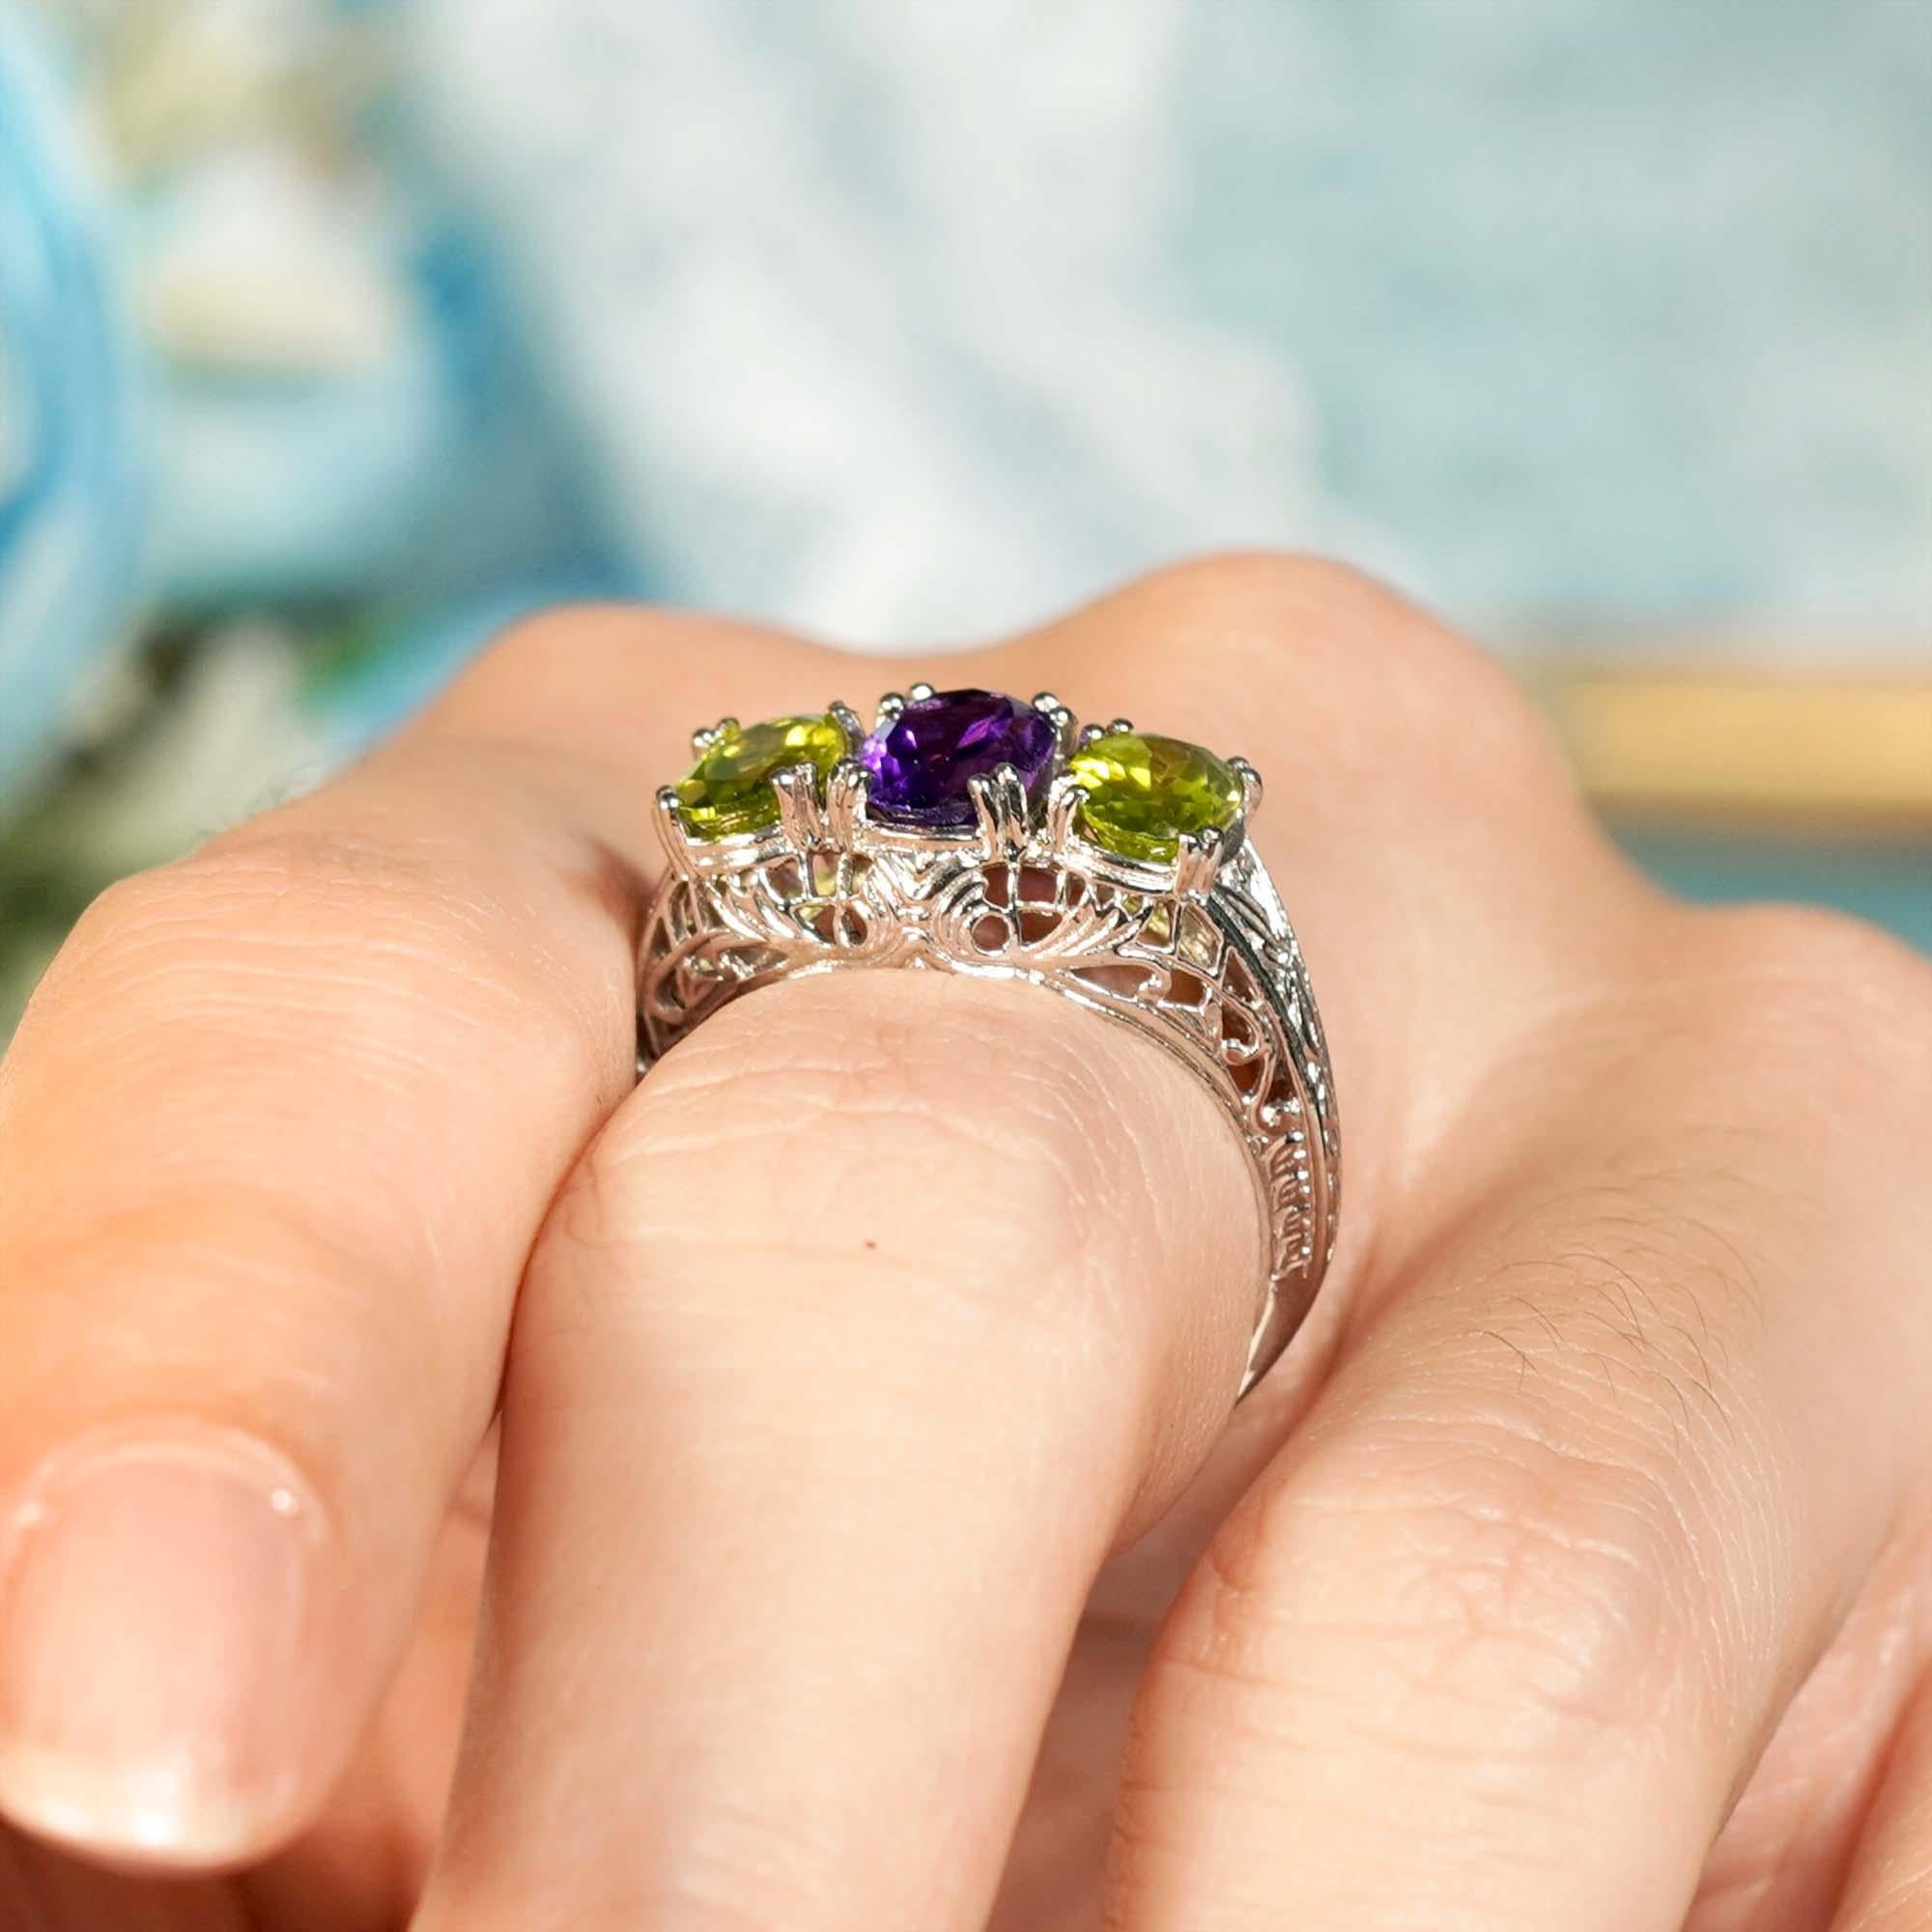 For Sale:  Natural Amethyst Peridot Vintage Style Filigree Three Stone Ring in 9K Gold 12